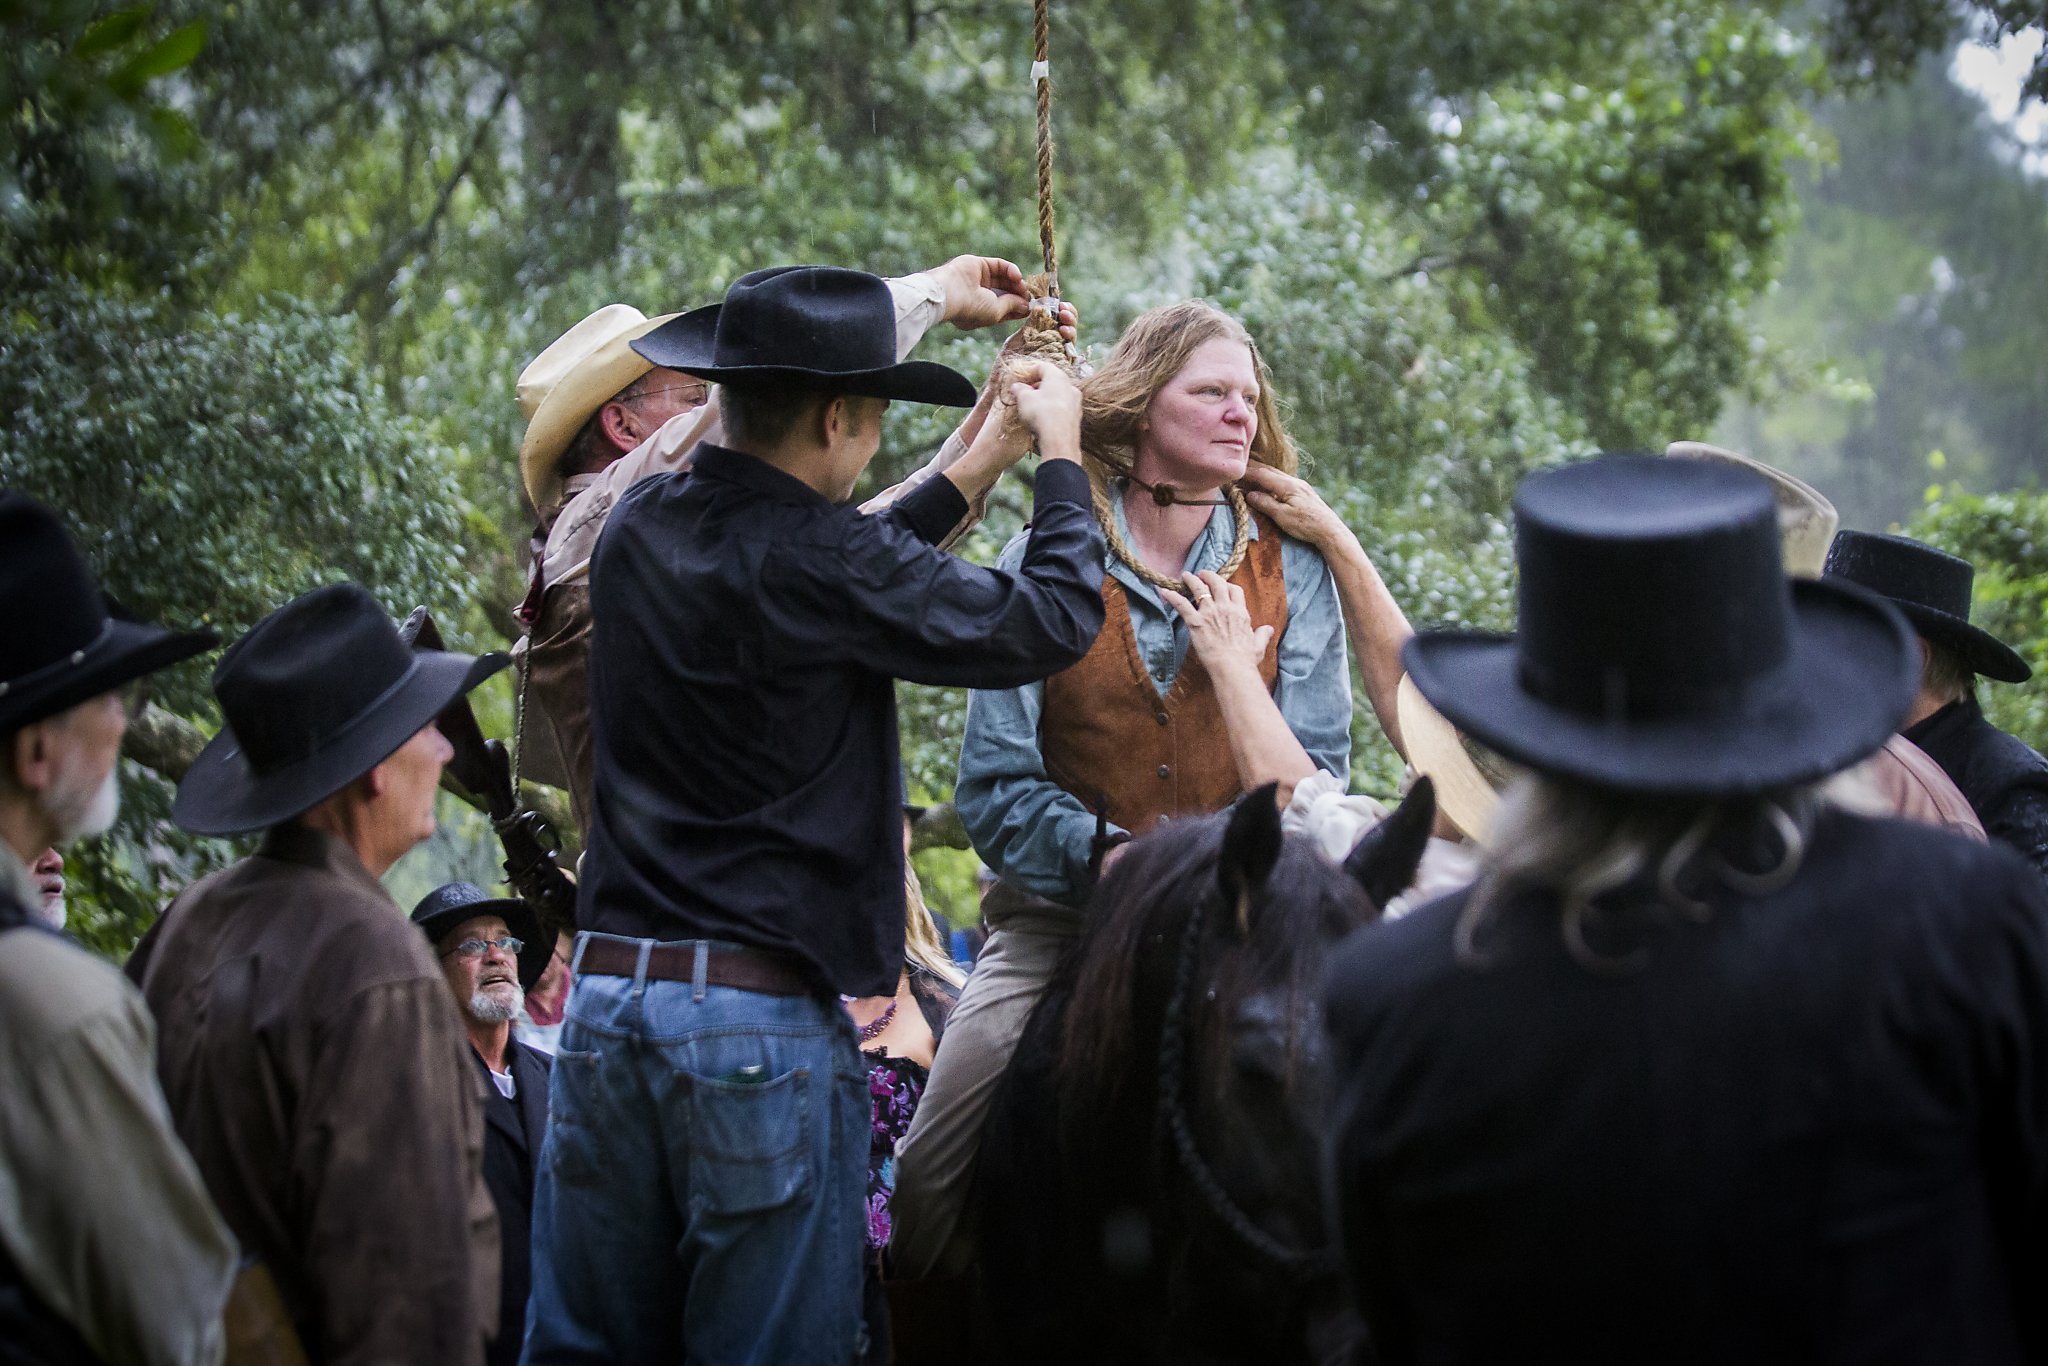 Texas town celebrates its heritage with a hanging re-enactment.